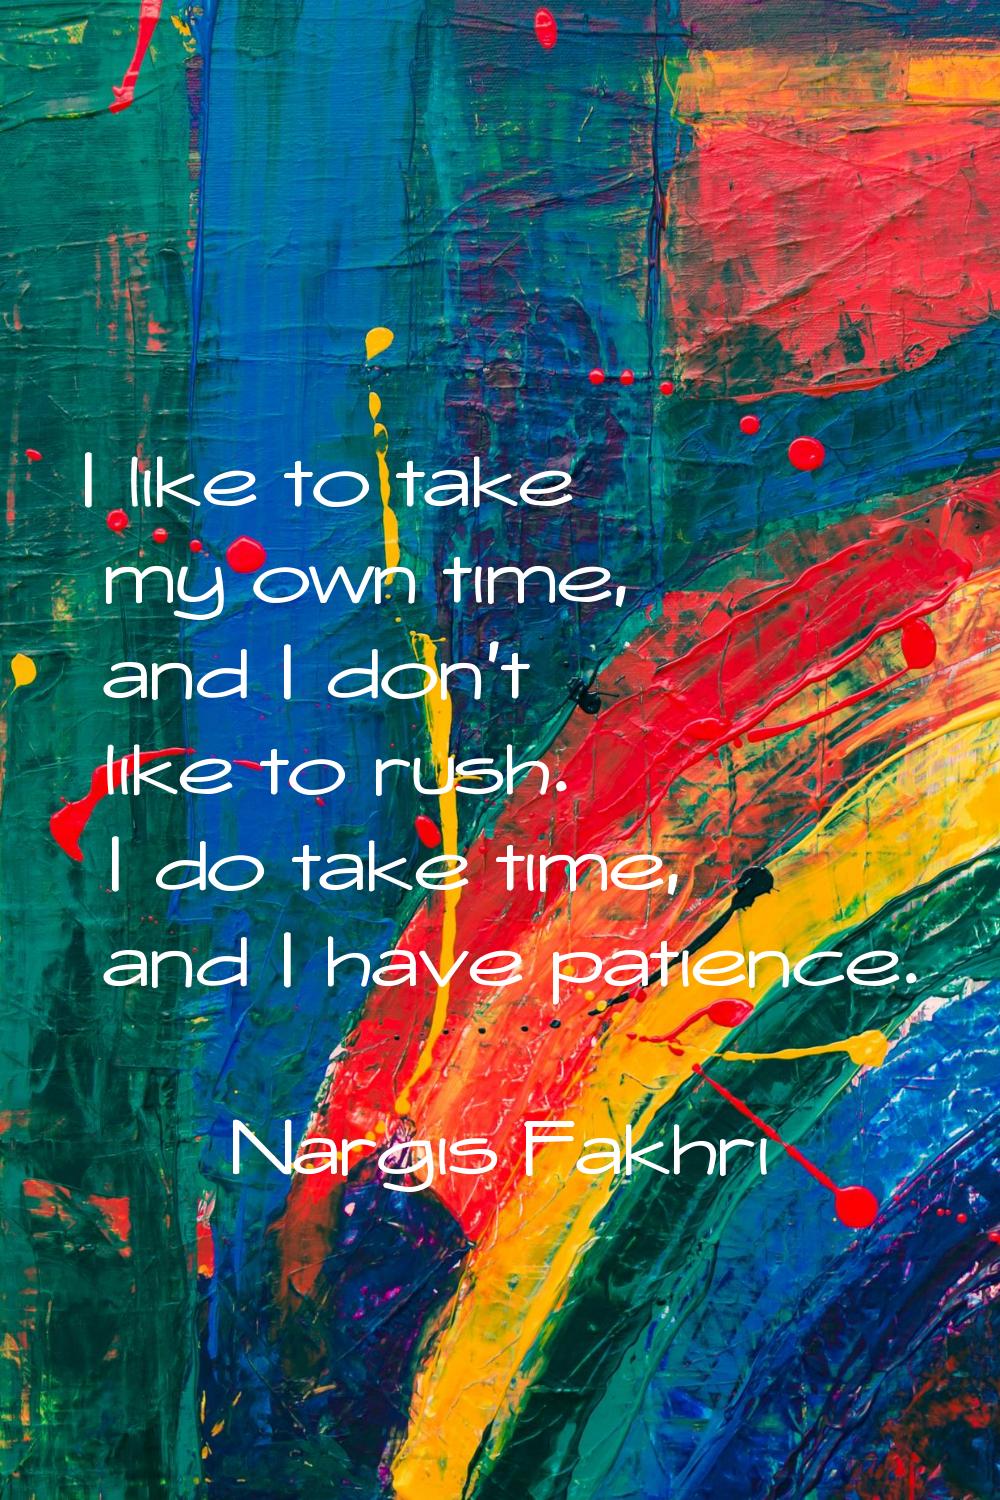 I like to take my own time, and I don't like to rush. I do take time, and I have patience.